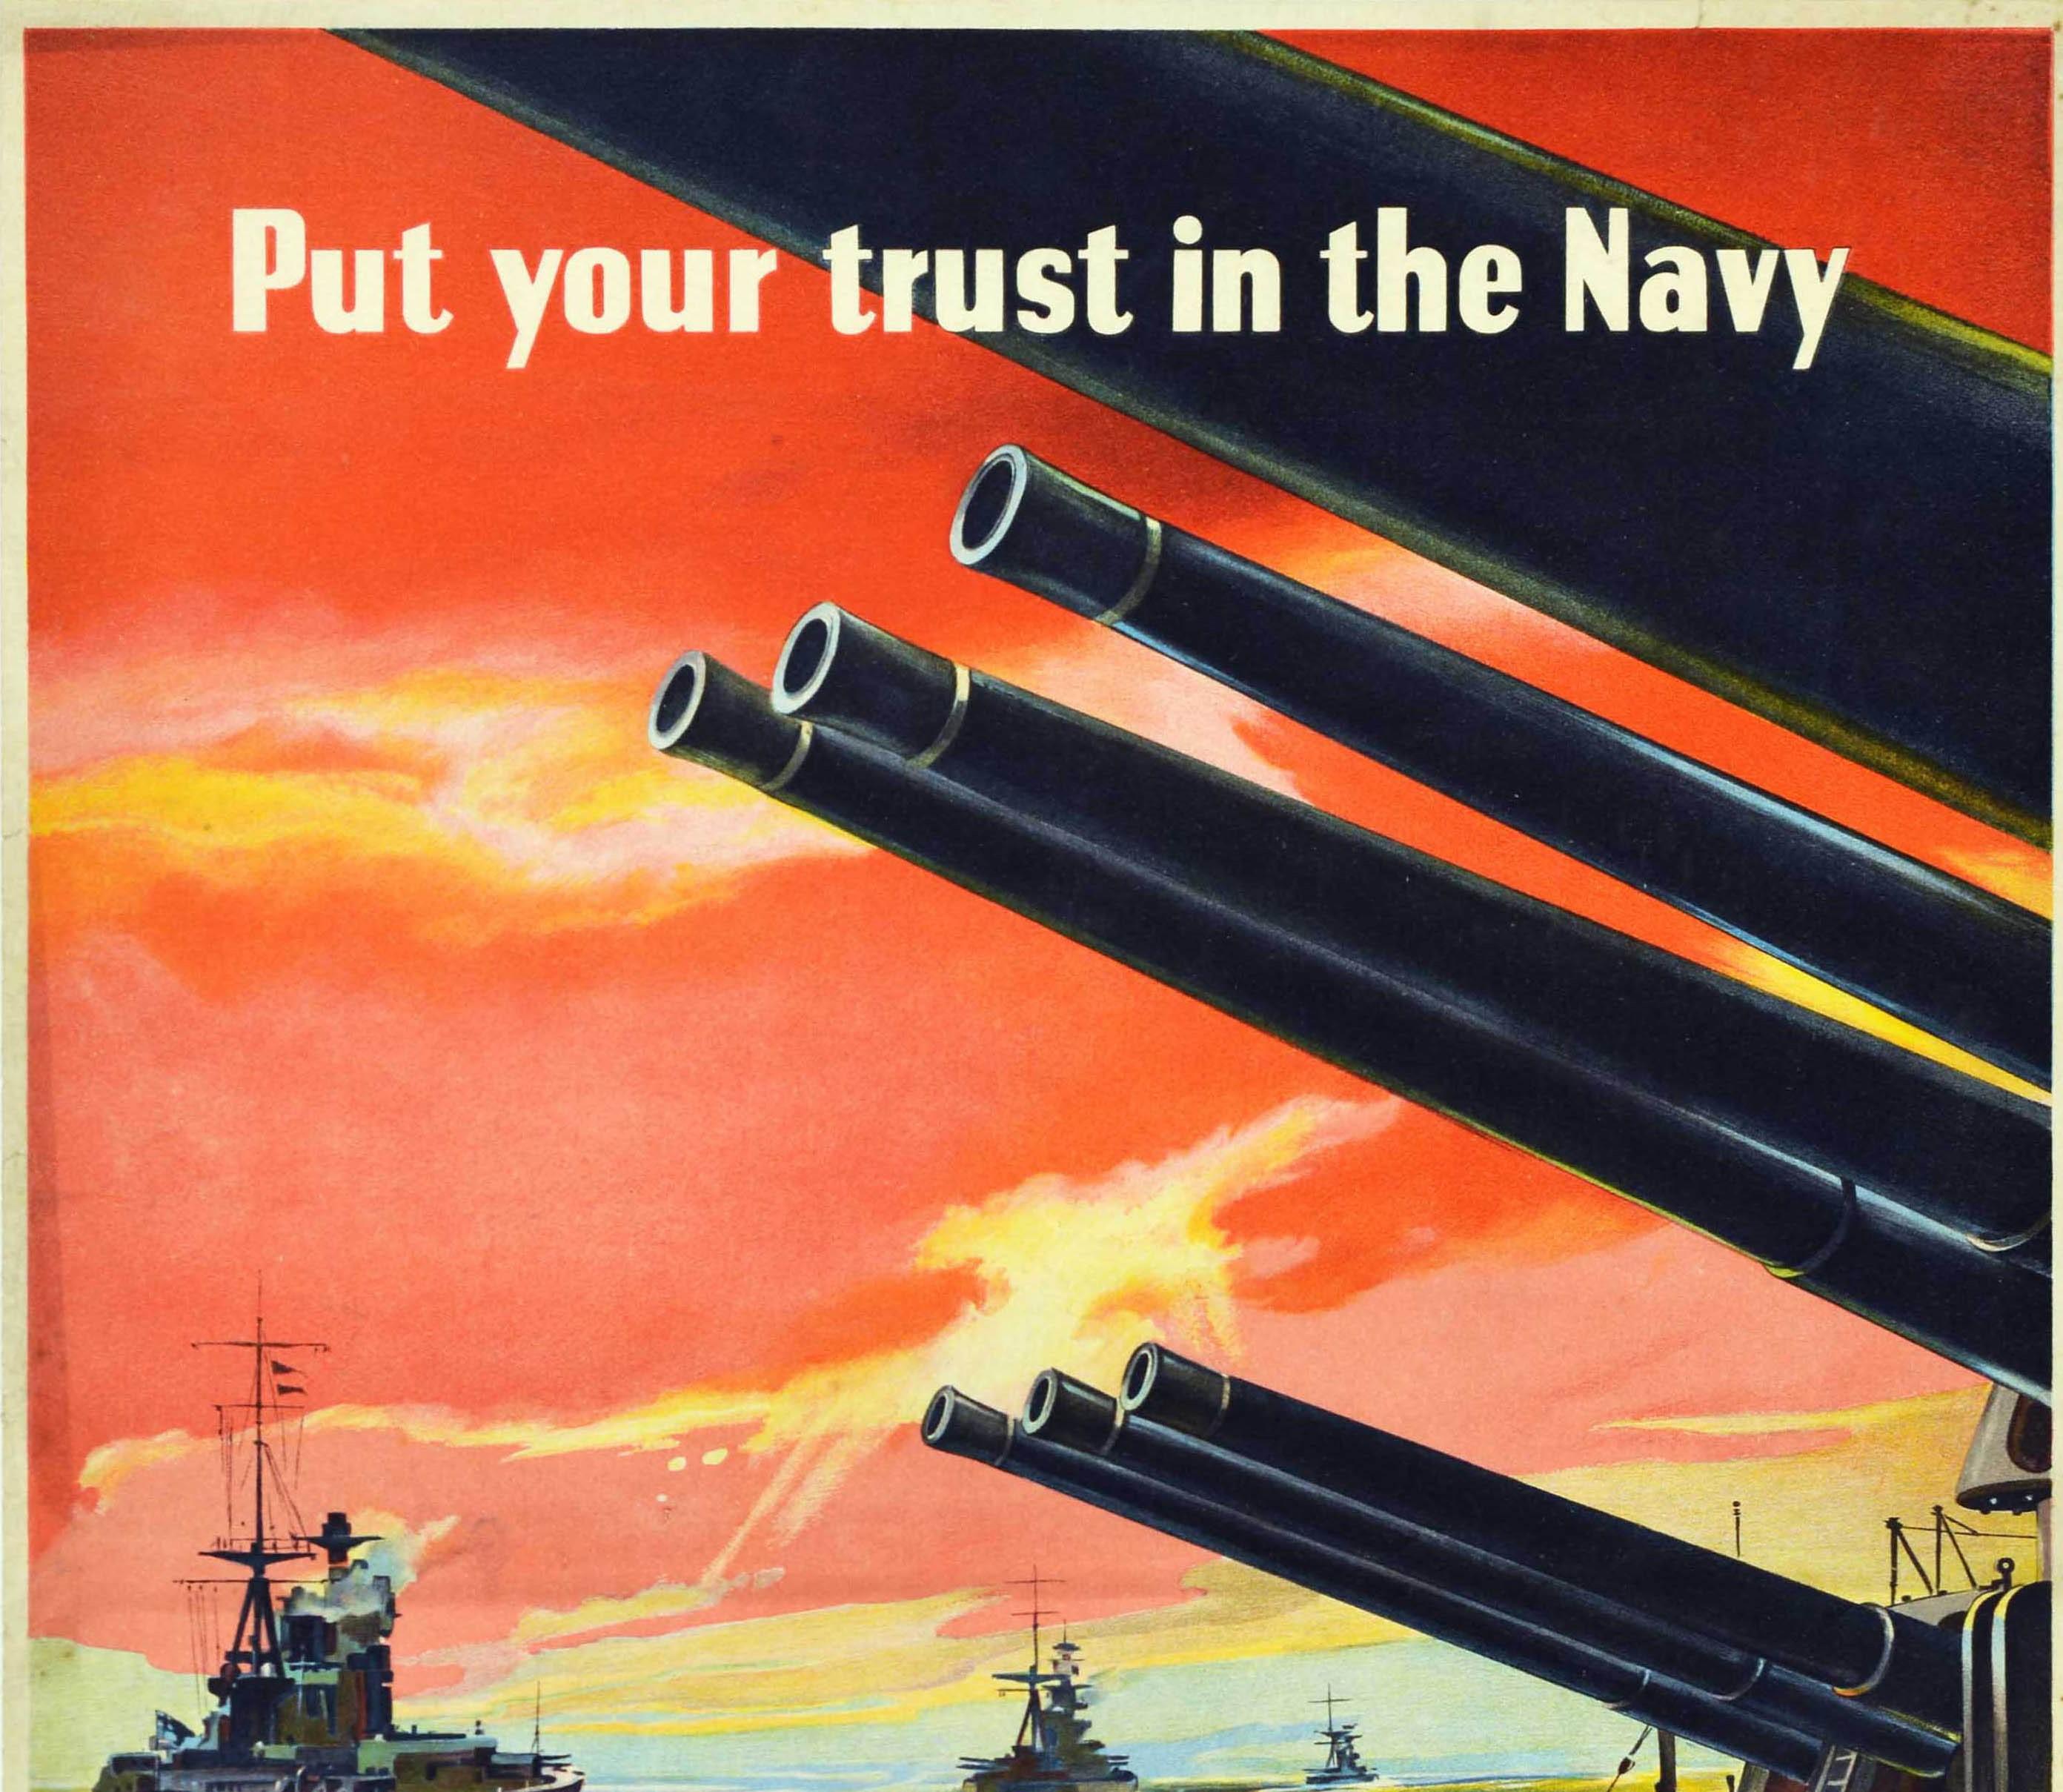 Original vintage World War Two poster - Put Your Trust In The Navy & Your Money In Savings Certificates - featuring a military illustration of sailors on the deck of a warship below the gun turrets with more ships at sea below the a dramatic red